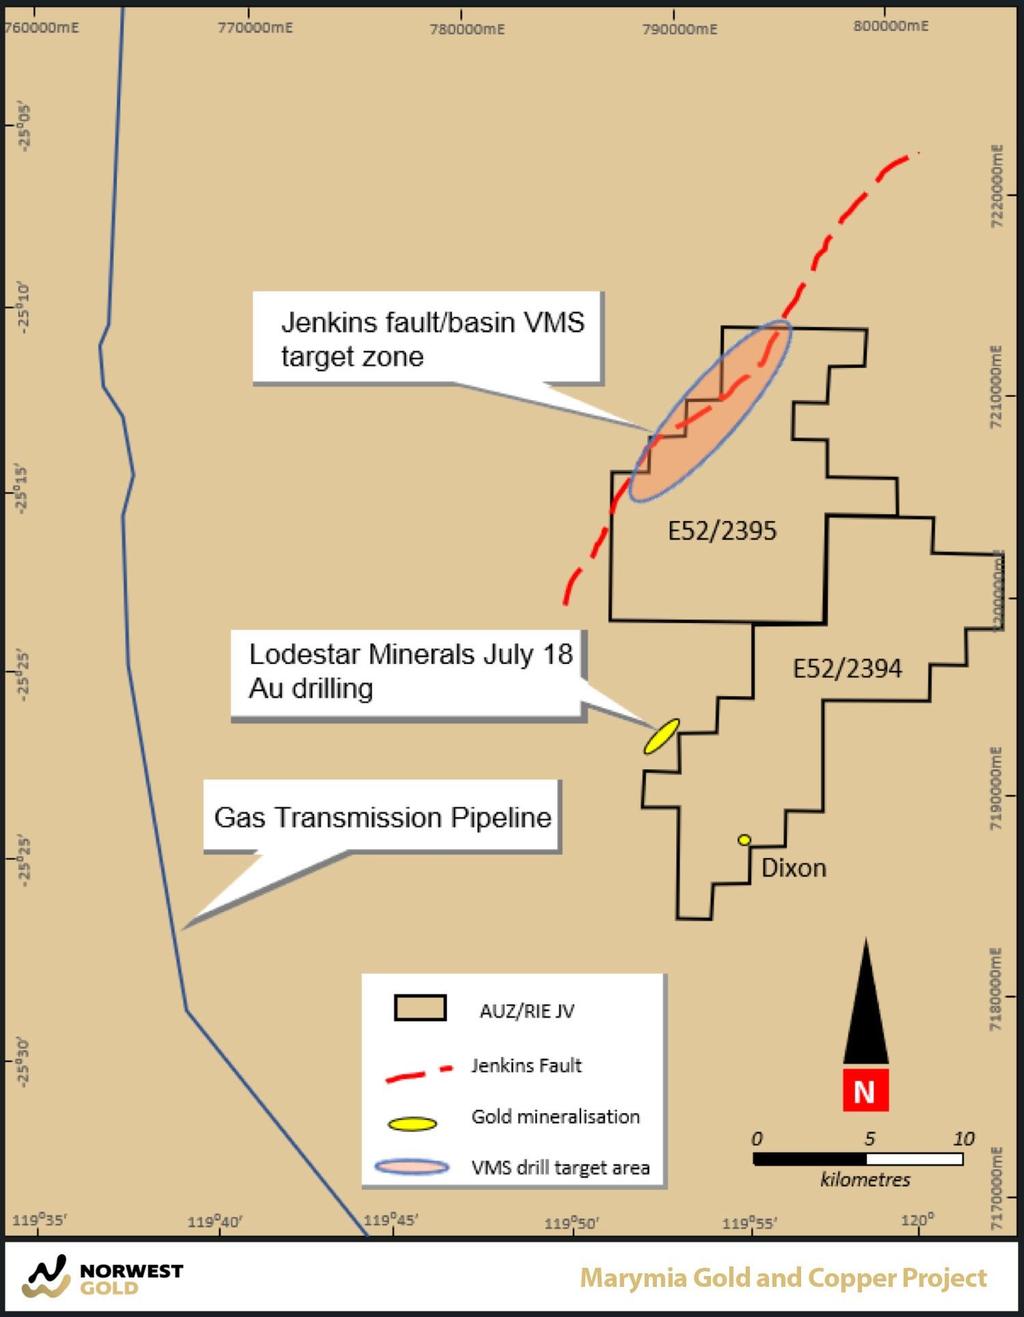 Figure 8: The Marymia Gold and Copper Project, located 900 kilometres